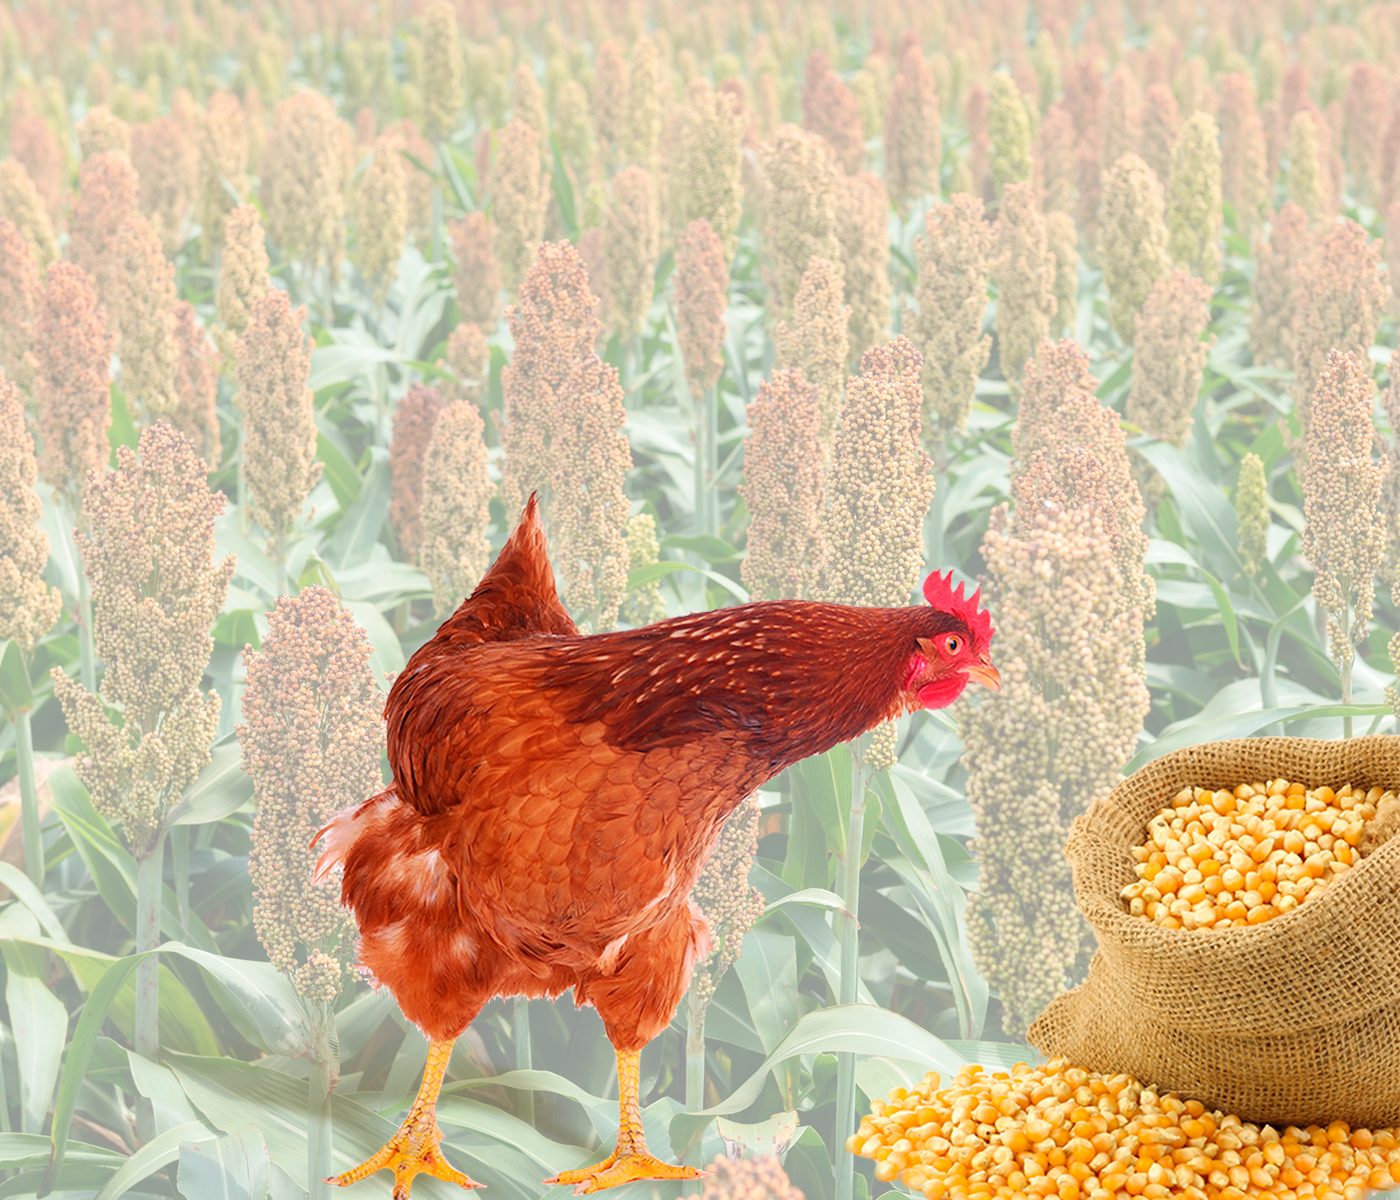 Sorghum grain as a replacement for corn in poultry diets